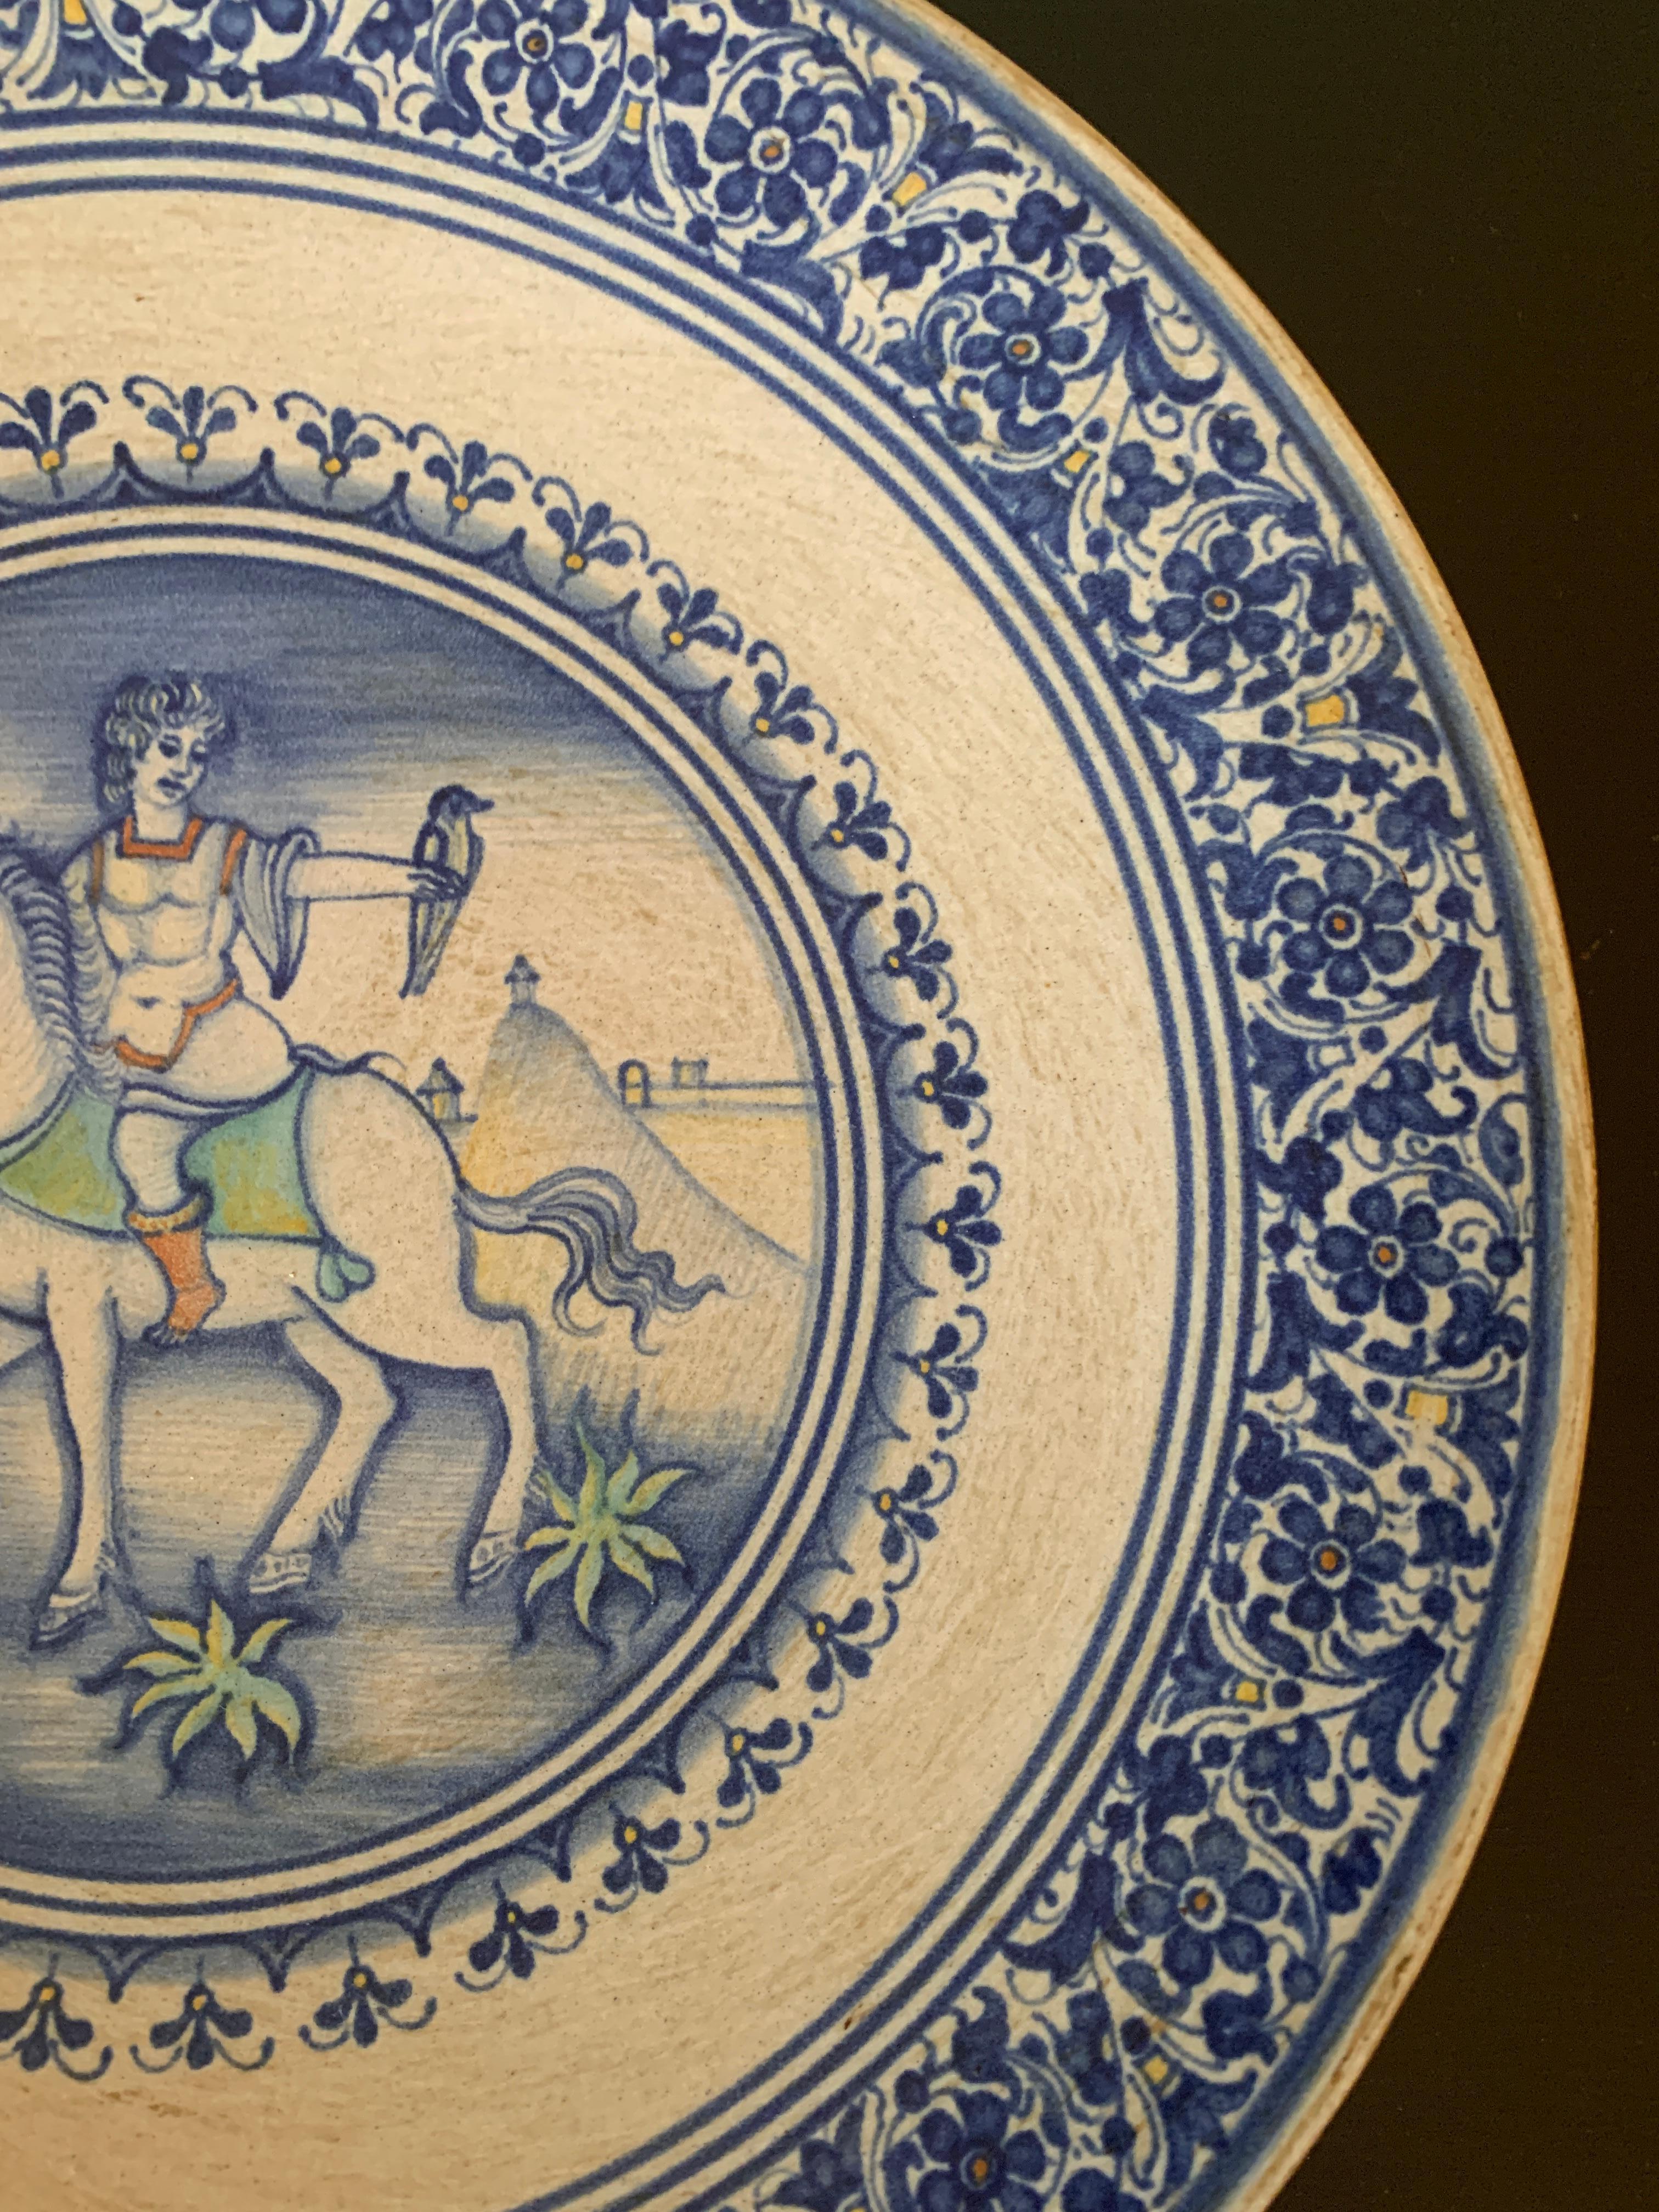 Italian Provincial Deruta Hand Painted Faience Allegorical Pottery Wall Plate In Good Condition For Sale In Elkhart, IN